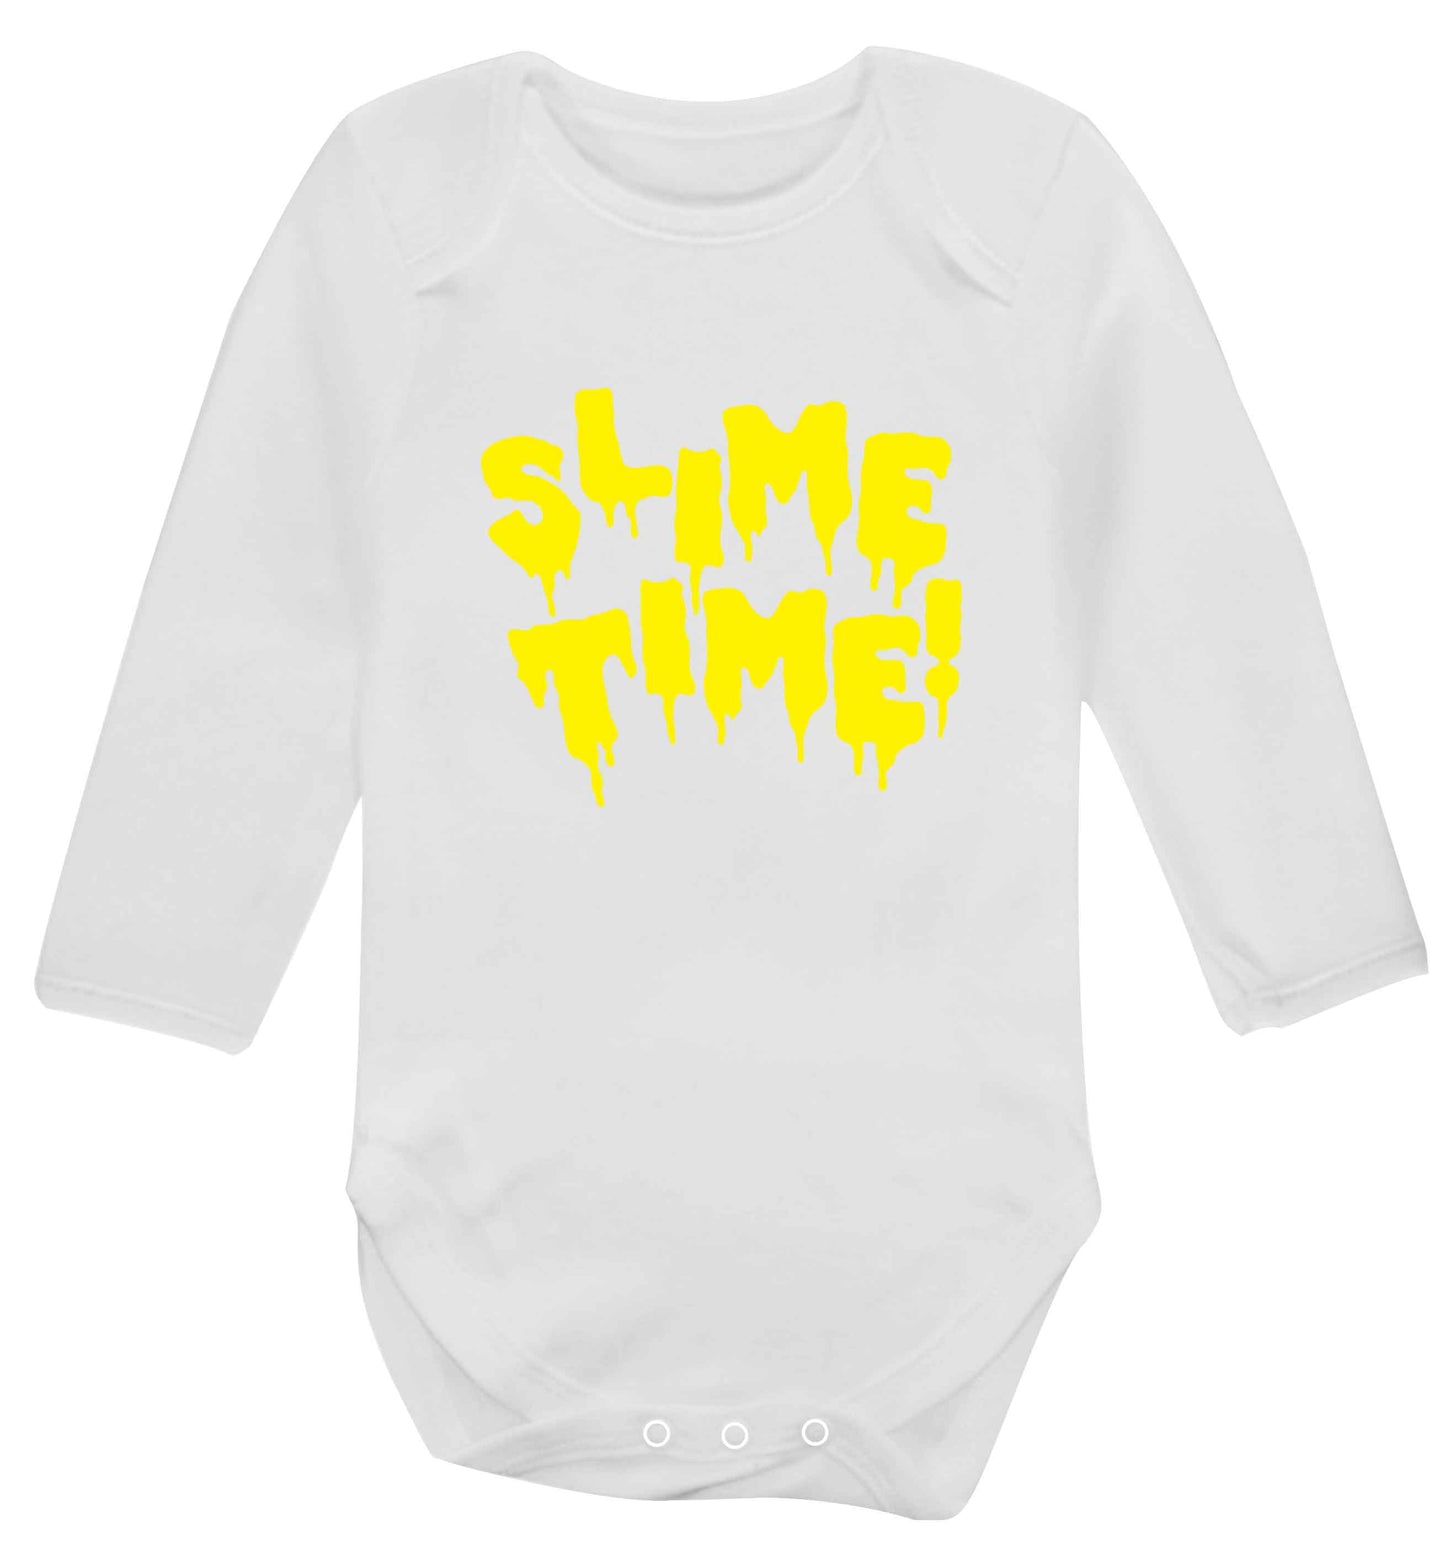 Neon yellow slime time baby vest long sleeved white 6-12 months